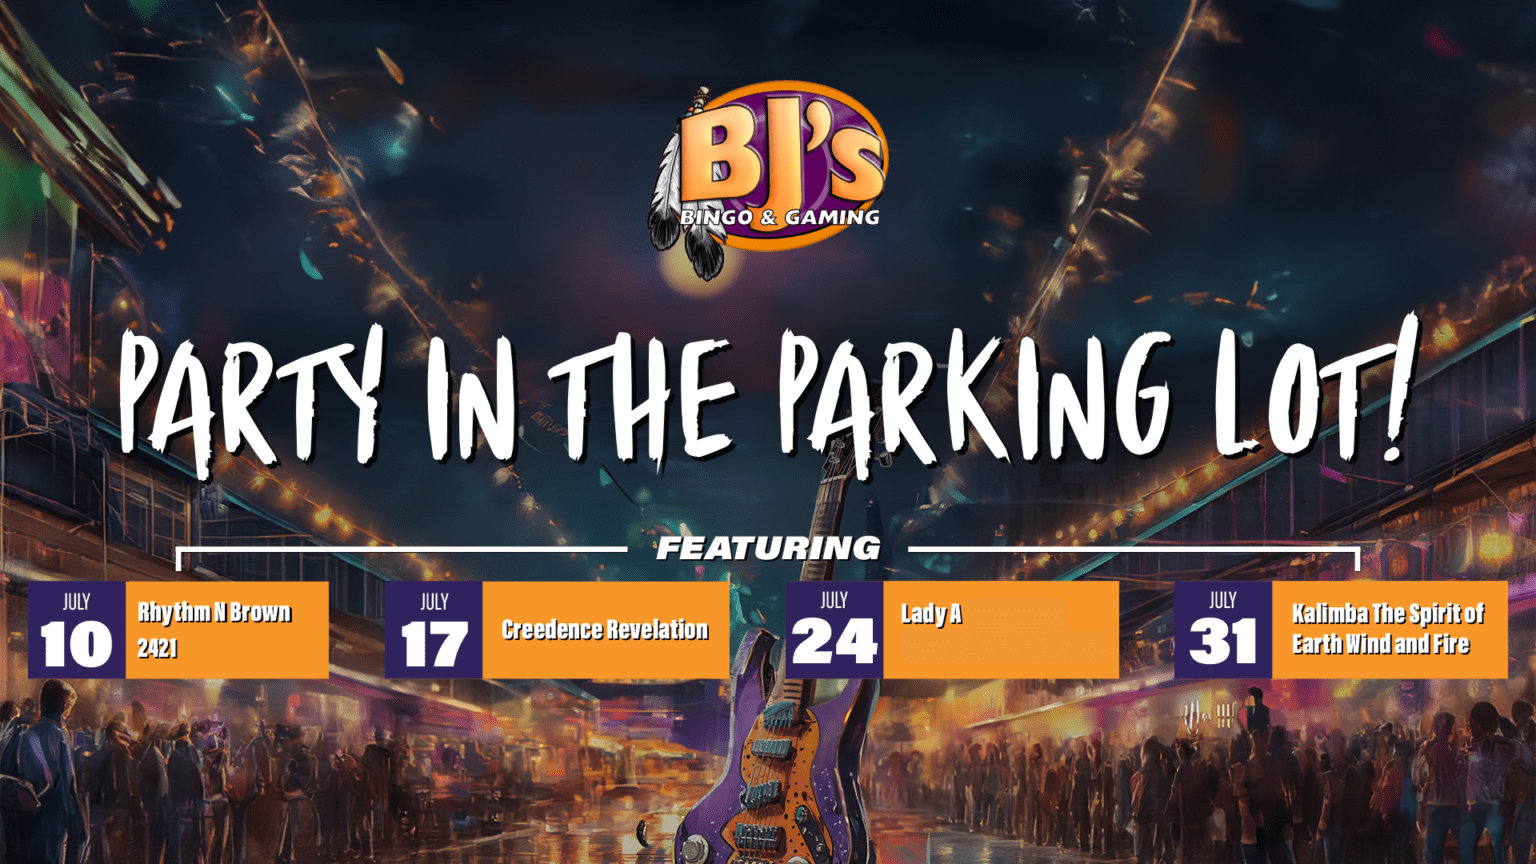 BJ's Bingo & Gaming Is Hosting The First Ever Party In The Parking Lot This July